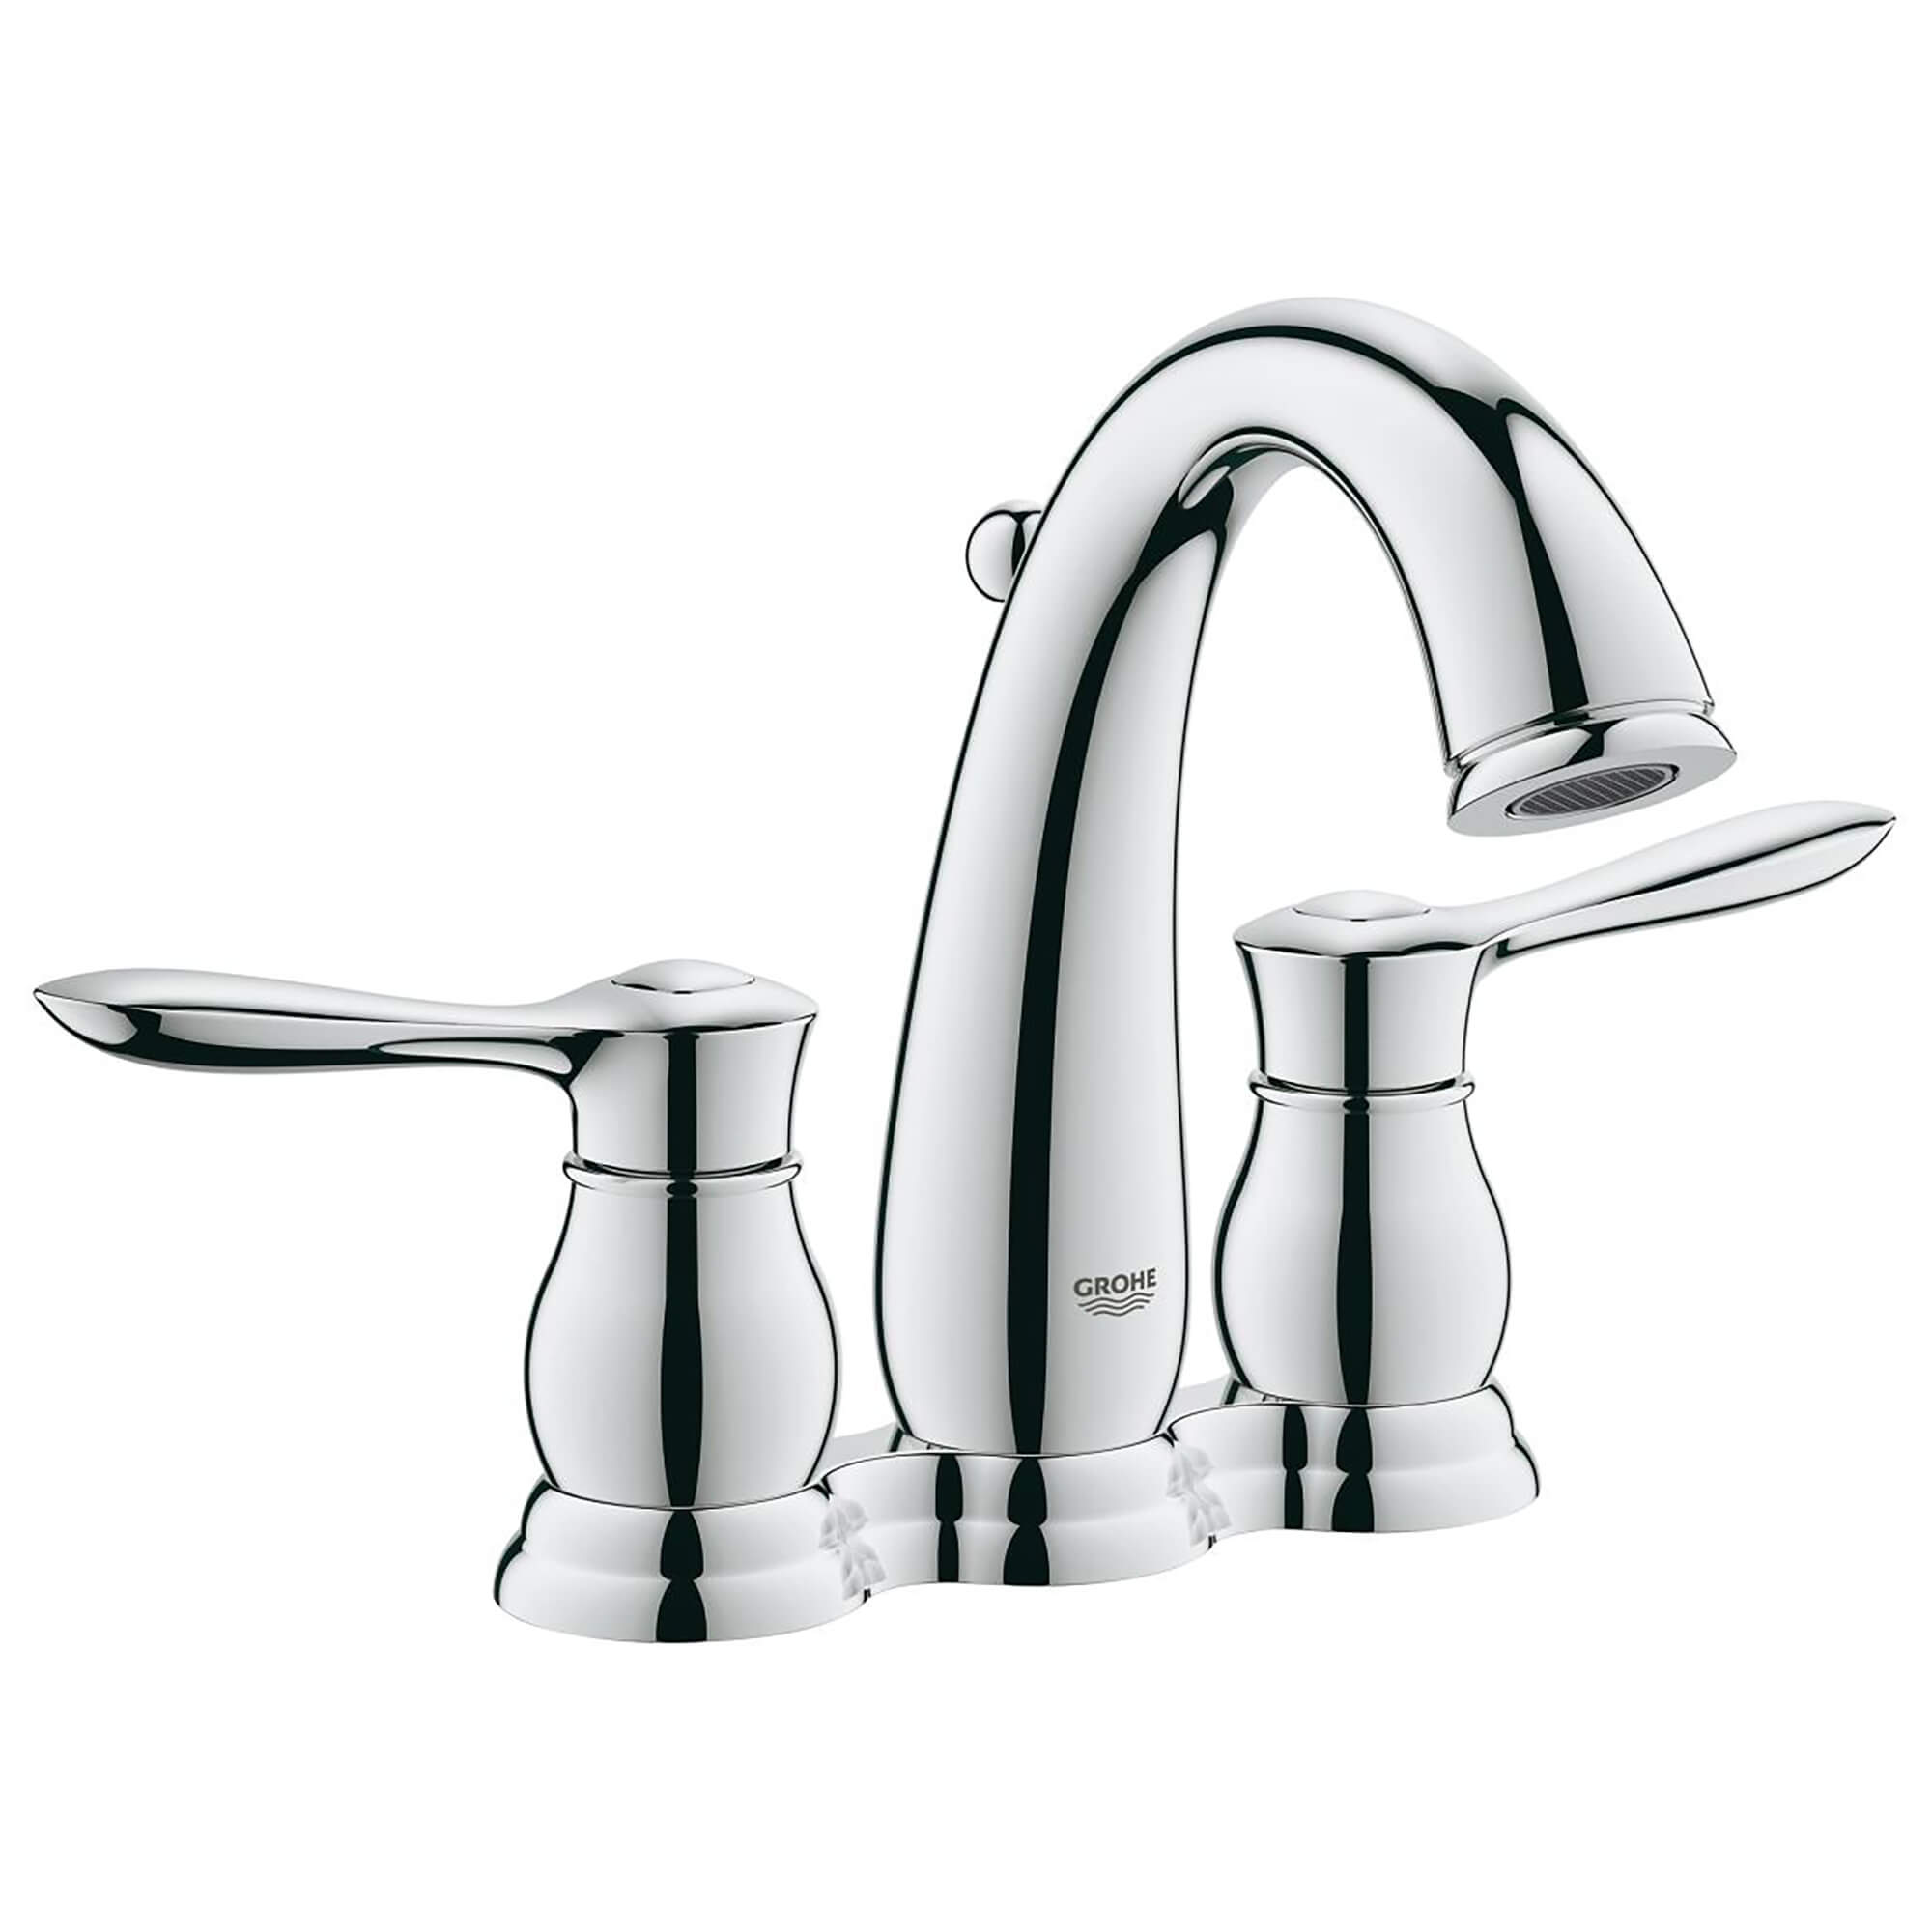 Parkfield 4 In Centerset 2 Handle Bathroom Faucet   15 GPM